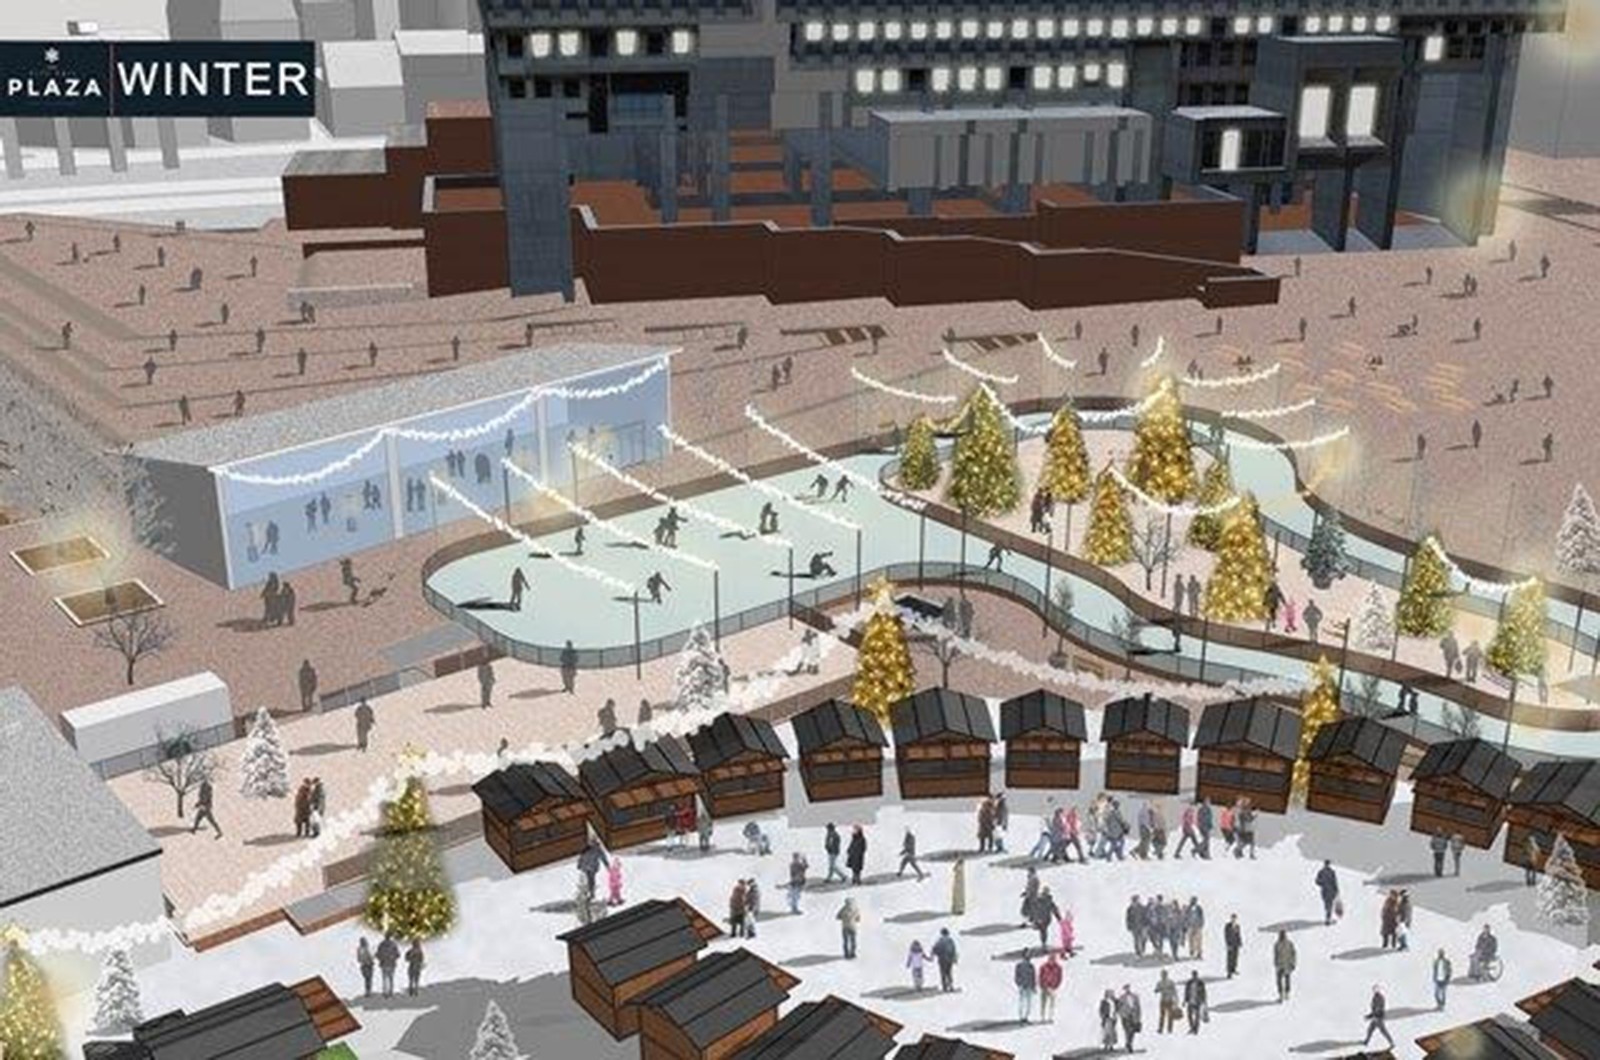 A rendering shows plans for enhancements such as an ice skating rink and a holiday market in City Hall Plaza for the winter season. PHOTO COURTESY BOSTON GARDEN DEVELOPMENT CORPORATION 